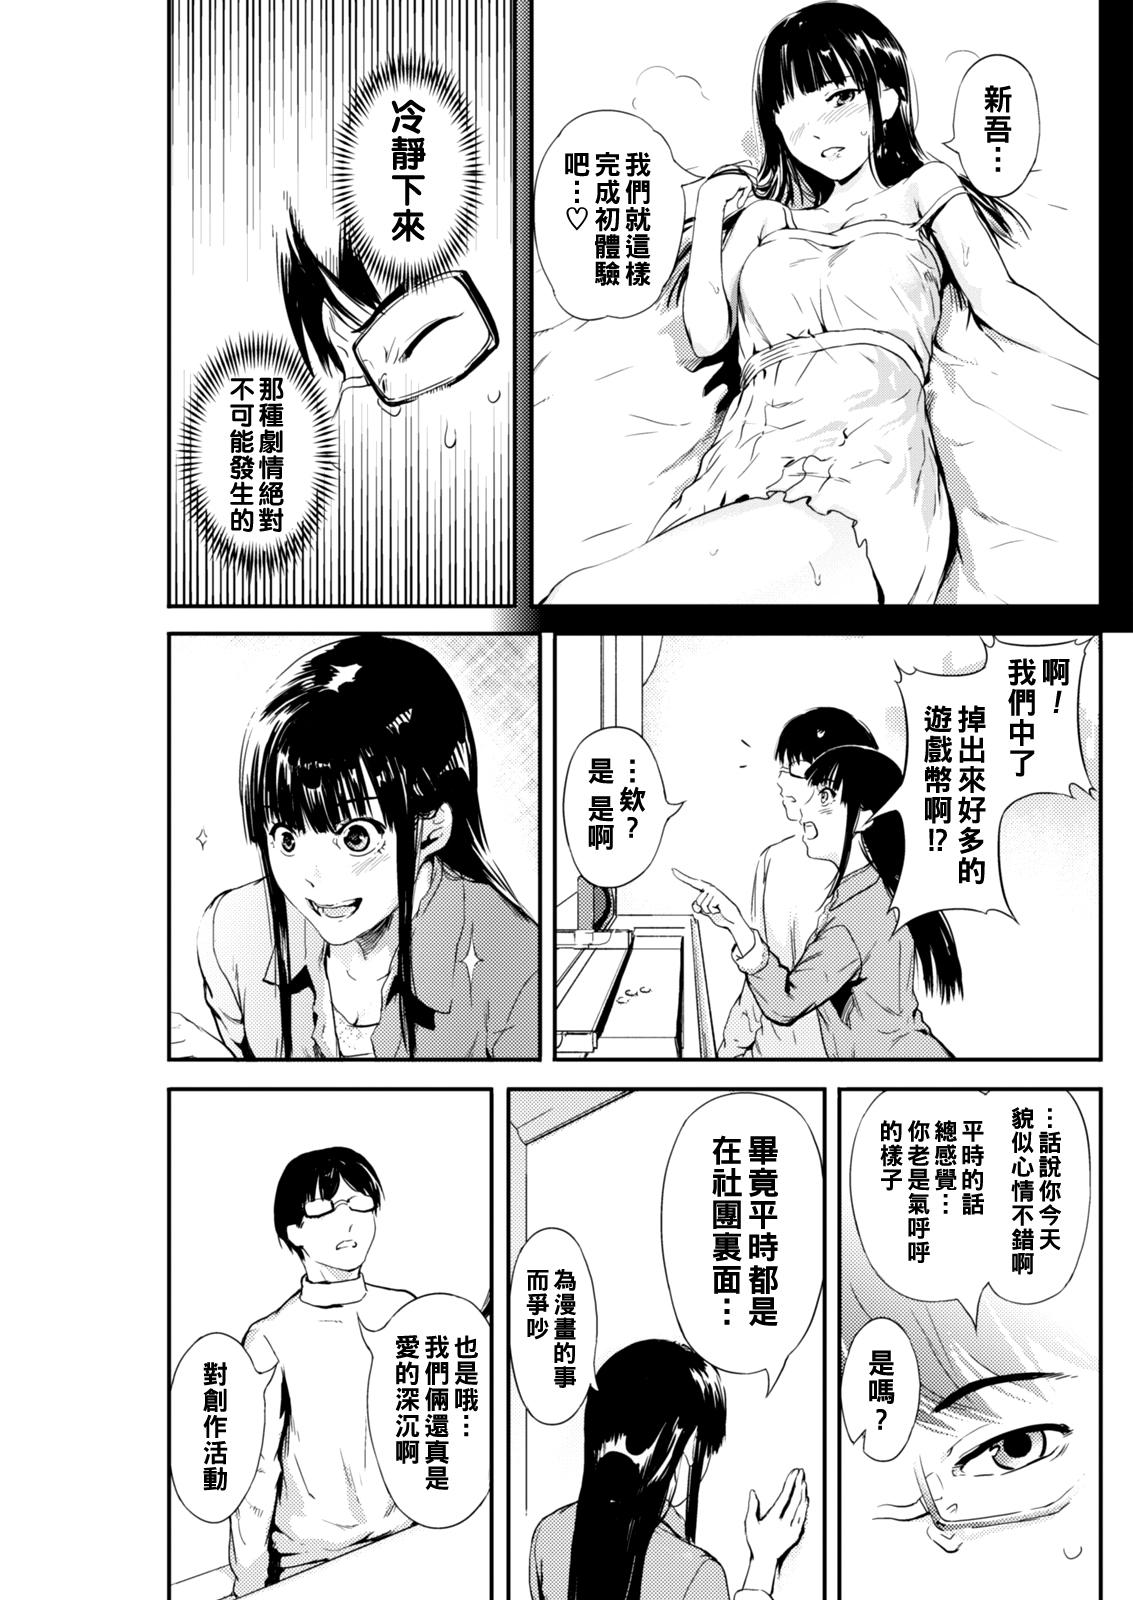 Anal Play 漫画ガール（Chinese） Tanned - Page 7